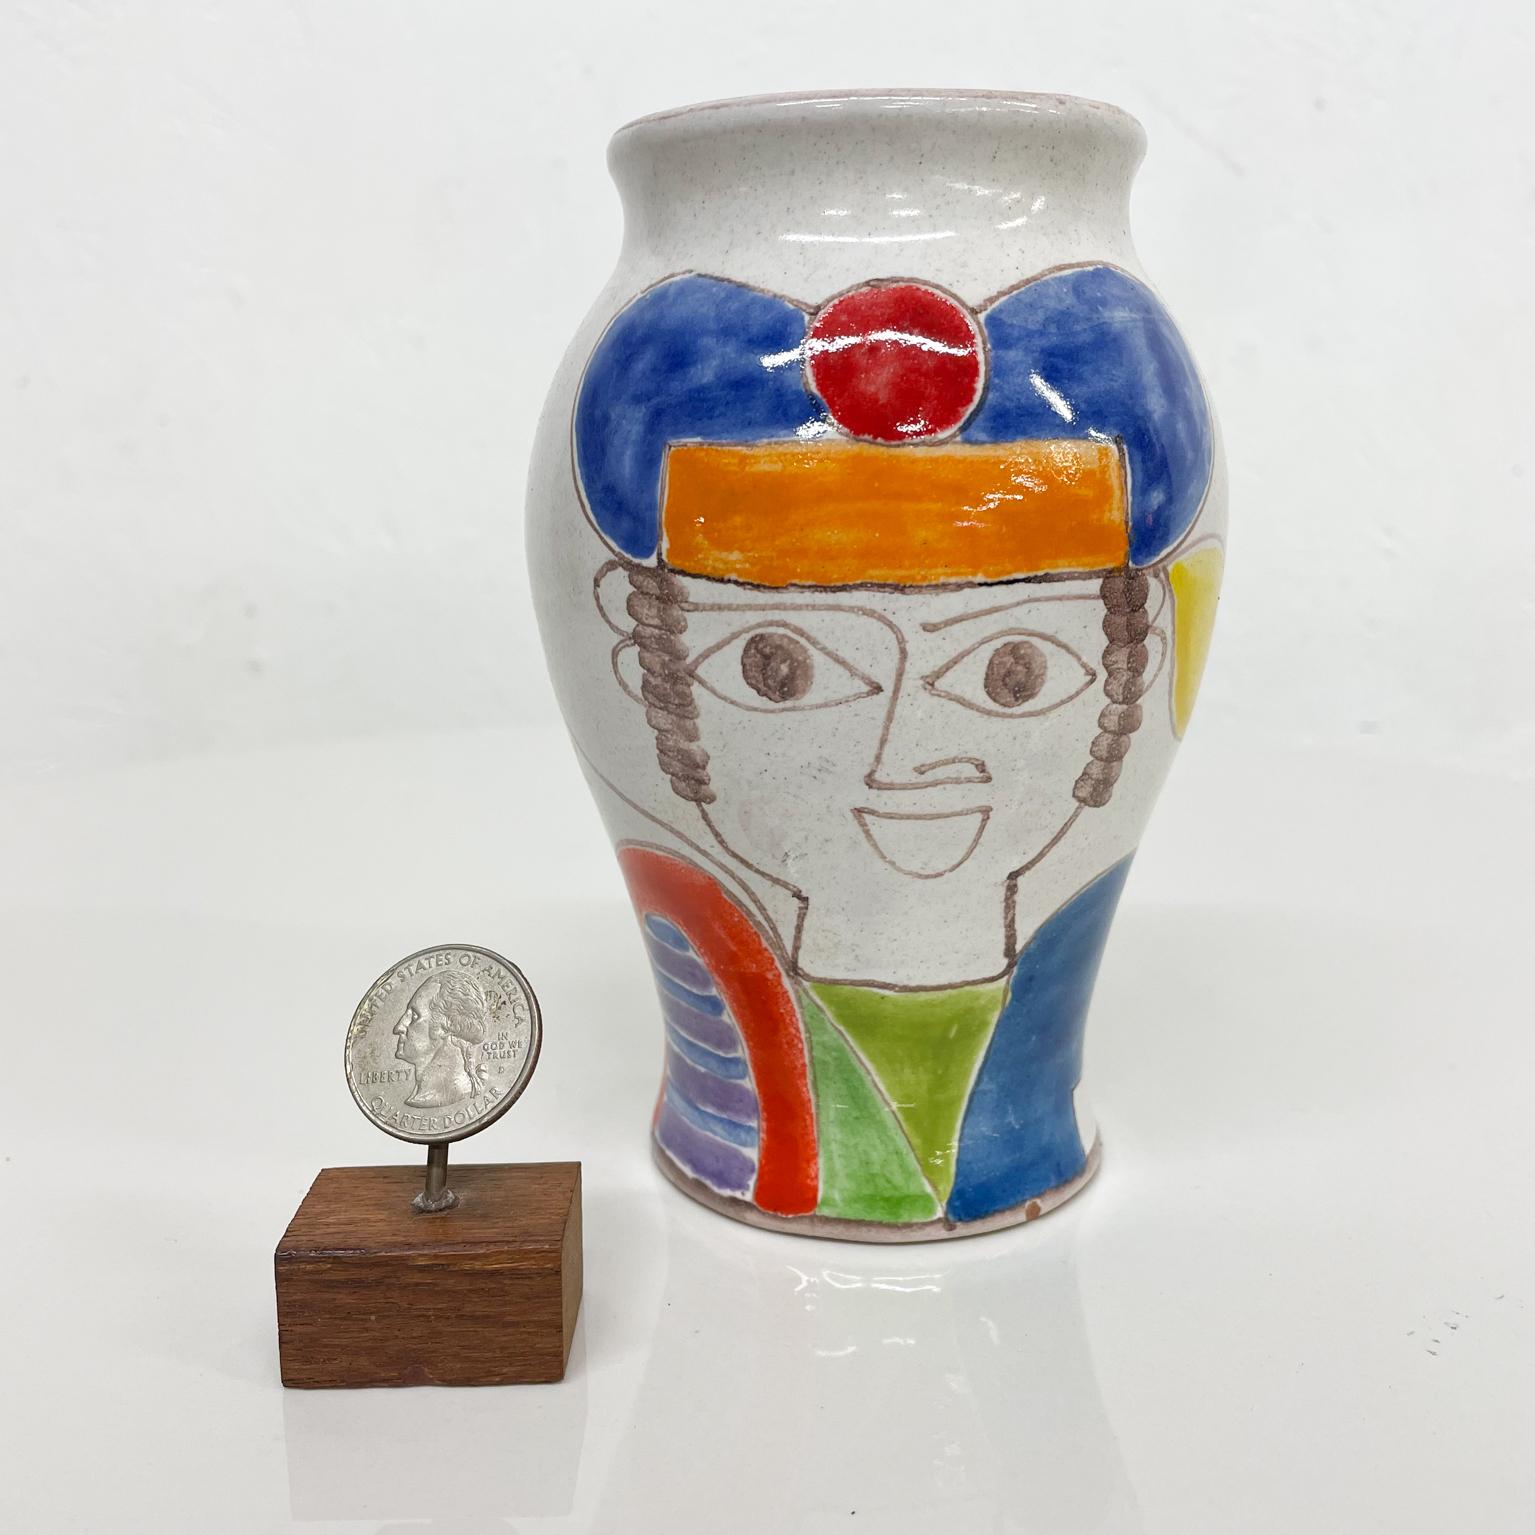 Italian pottery vase.
from Italy DeSimone hand painted ceramic pottery vase.
Giovanni De Simone Italian colorful vase 1960s Italy.
Measures: 5.63 tall x 3.75 diameter
Preowned original unrestored good vintage condition.
See images provided.
 